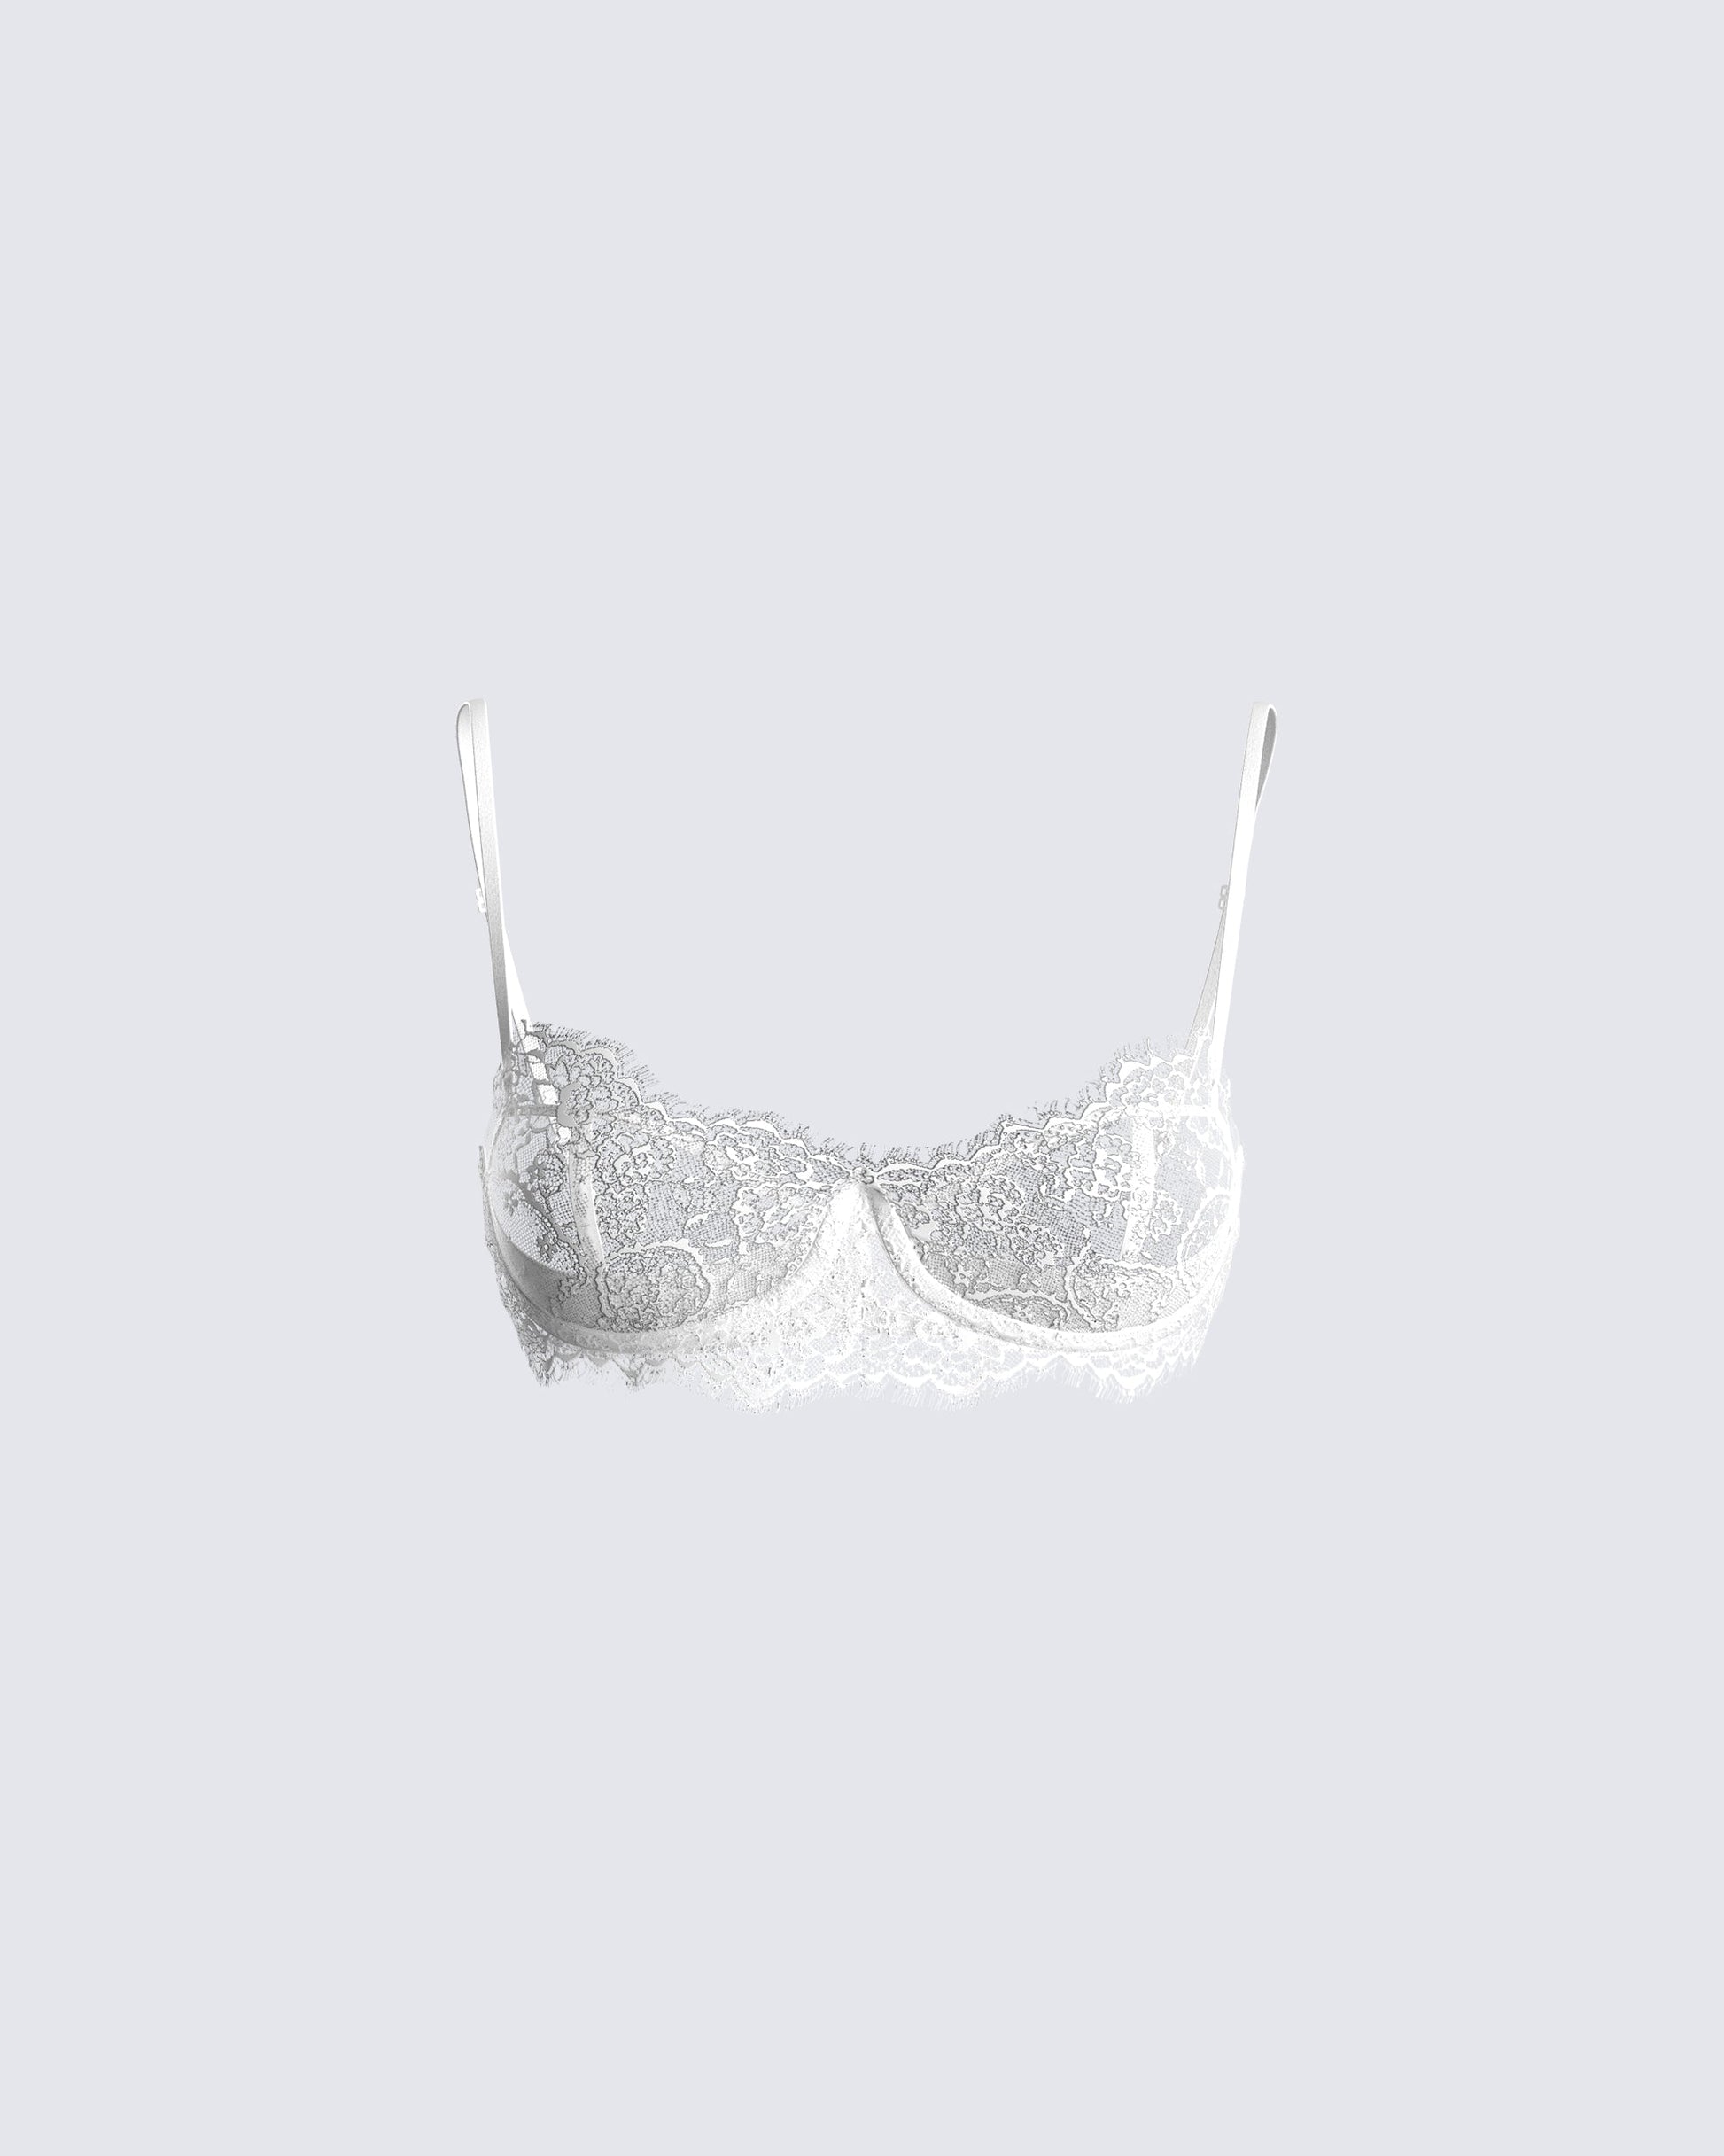 Soft White Floral Bandeau Style Bralette , Lace Bra by Fidditchdesigns 